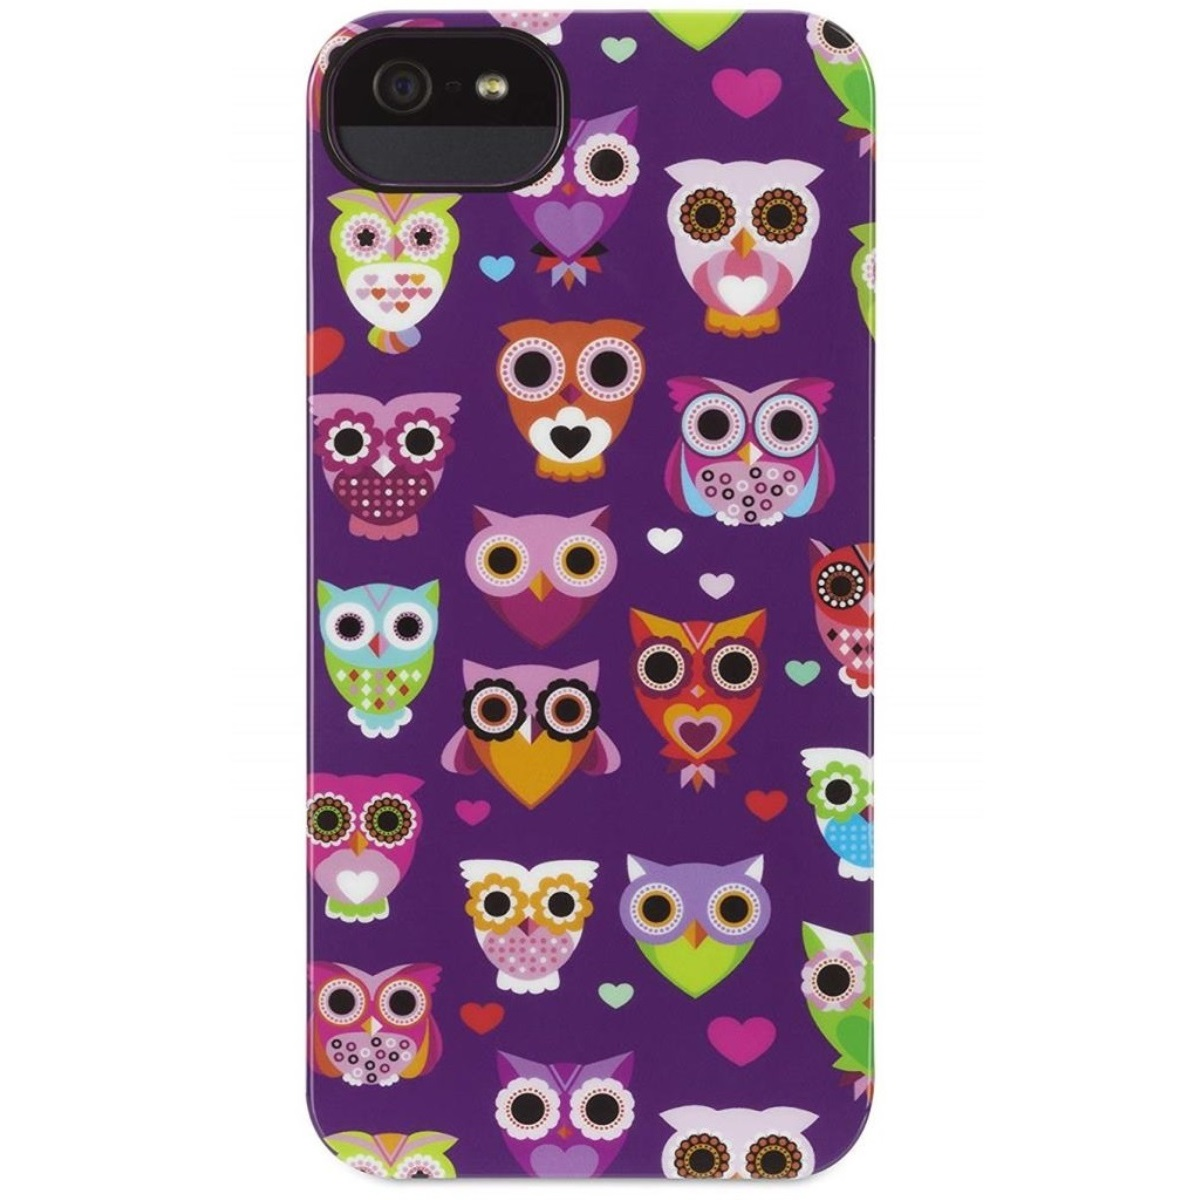 Lila Owl, Backcover, Eyes GRIFFIN Wise Apple, Touch iPod 5G,